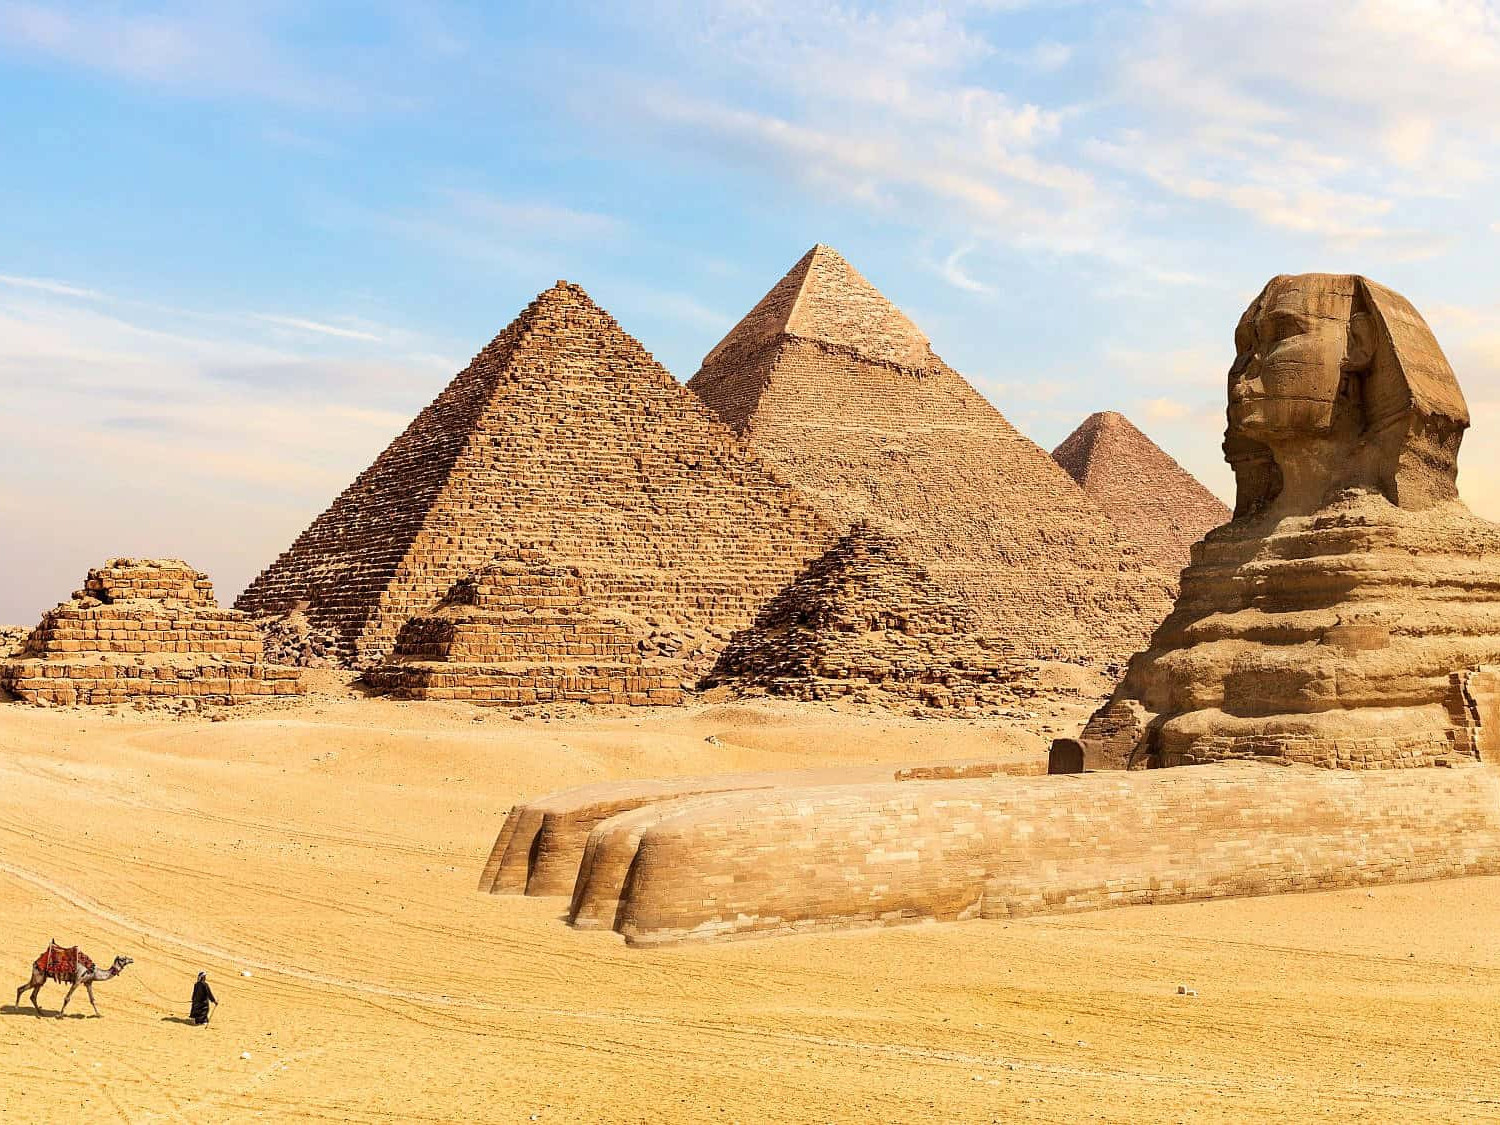 All about the pyramids of Egypt